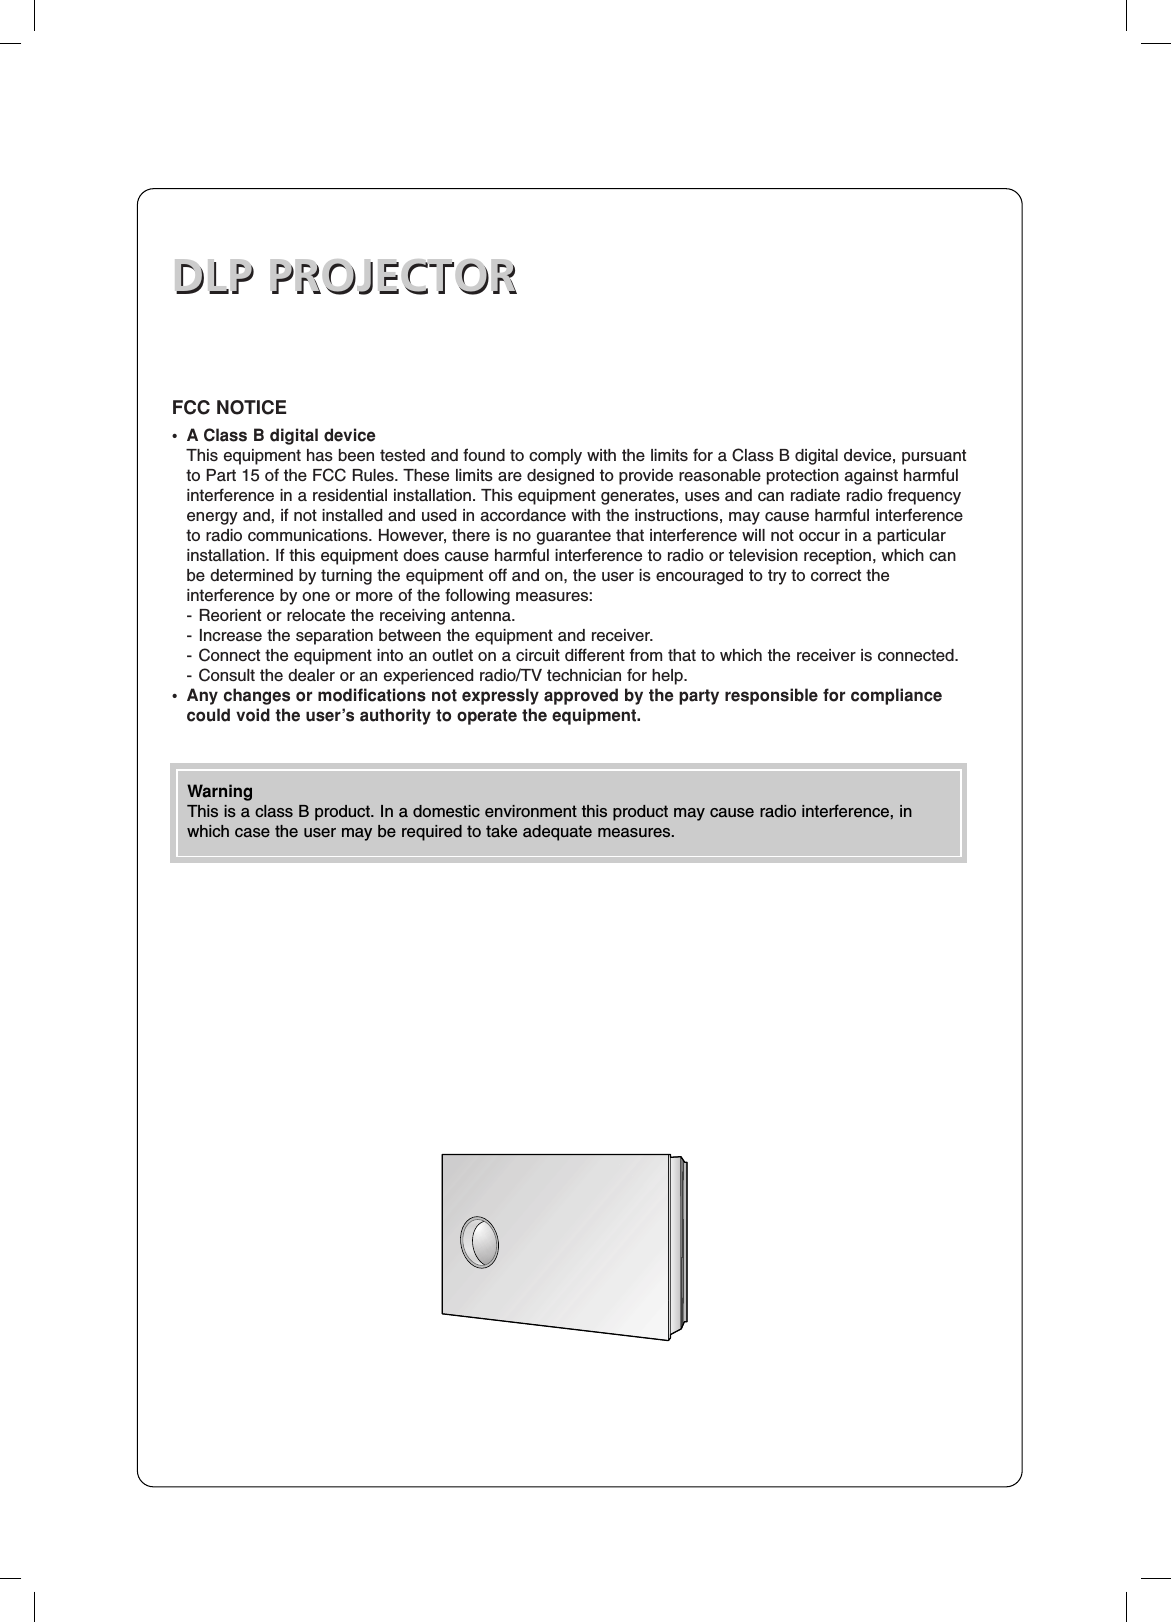 DLP PROJECTORDLP PROJECTORFCC NOTICE• A Class B digital deviceThis equipment has been tested and found to comply with the limits for a Class B digital device, pursuantto Part 15 of the FCC Rules. These limits are designed to provide reasonable protection against harmful interference in a residential installation. This equipment generates, uses and can radiate radio frequency energy and, if not installed and used in accordance with the instructions, may cause harmful interferenceto radio communications. However, there is no guarantee that interference will not occur in a particular installation. If this equipment does cause harmful interference to radio or television reception, which can be determined by turning the equipment off and on, the user is encouraged to try to correct the interference by one or more of the following measures:- Reorient or relocate the receiving antenna.- Increase the separation between the equipment and receiver.- Connect the equipment into an outlet on a circuit different from that to which the receiver is connected.- Consult the dealer or an experienced radio/TV technician for help.• Any changes or modifications not expressly approved by the party responsible for compliance could void the user’s authority to operate the equipment.WarningThis is a class B product. In a domestic environment this product may cause radio interference, inwhich case the user may be required to take adequate measures.